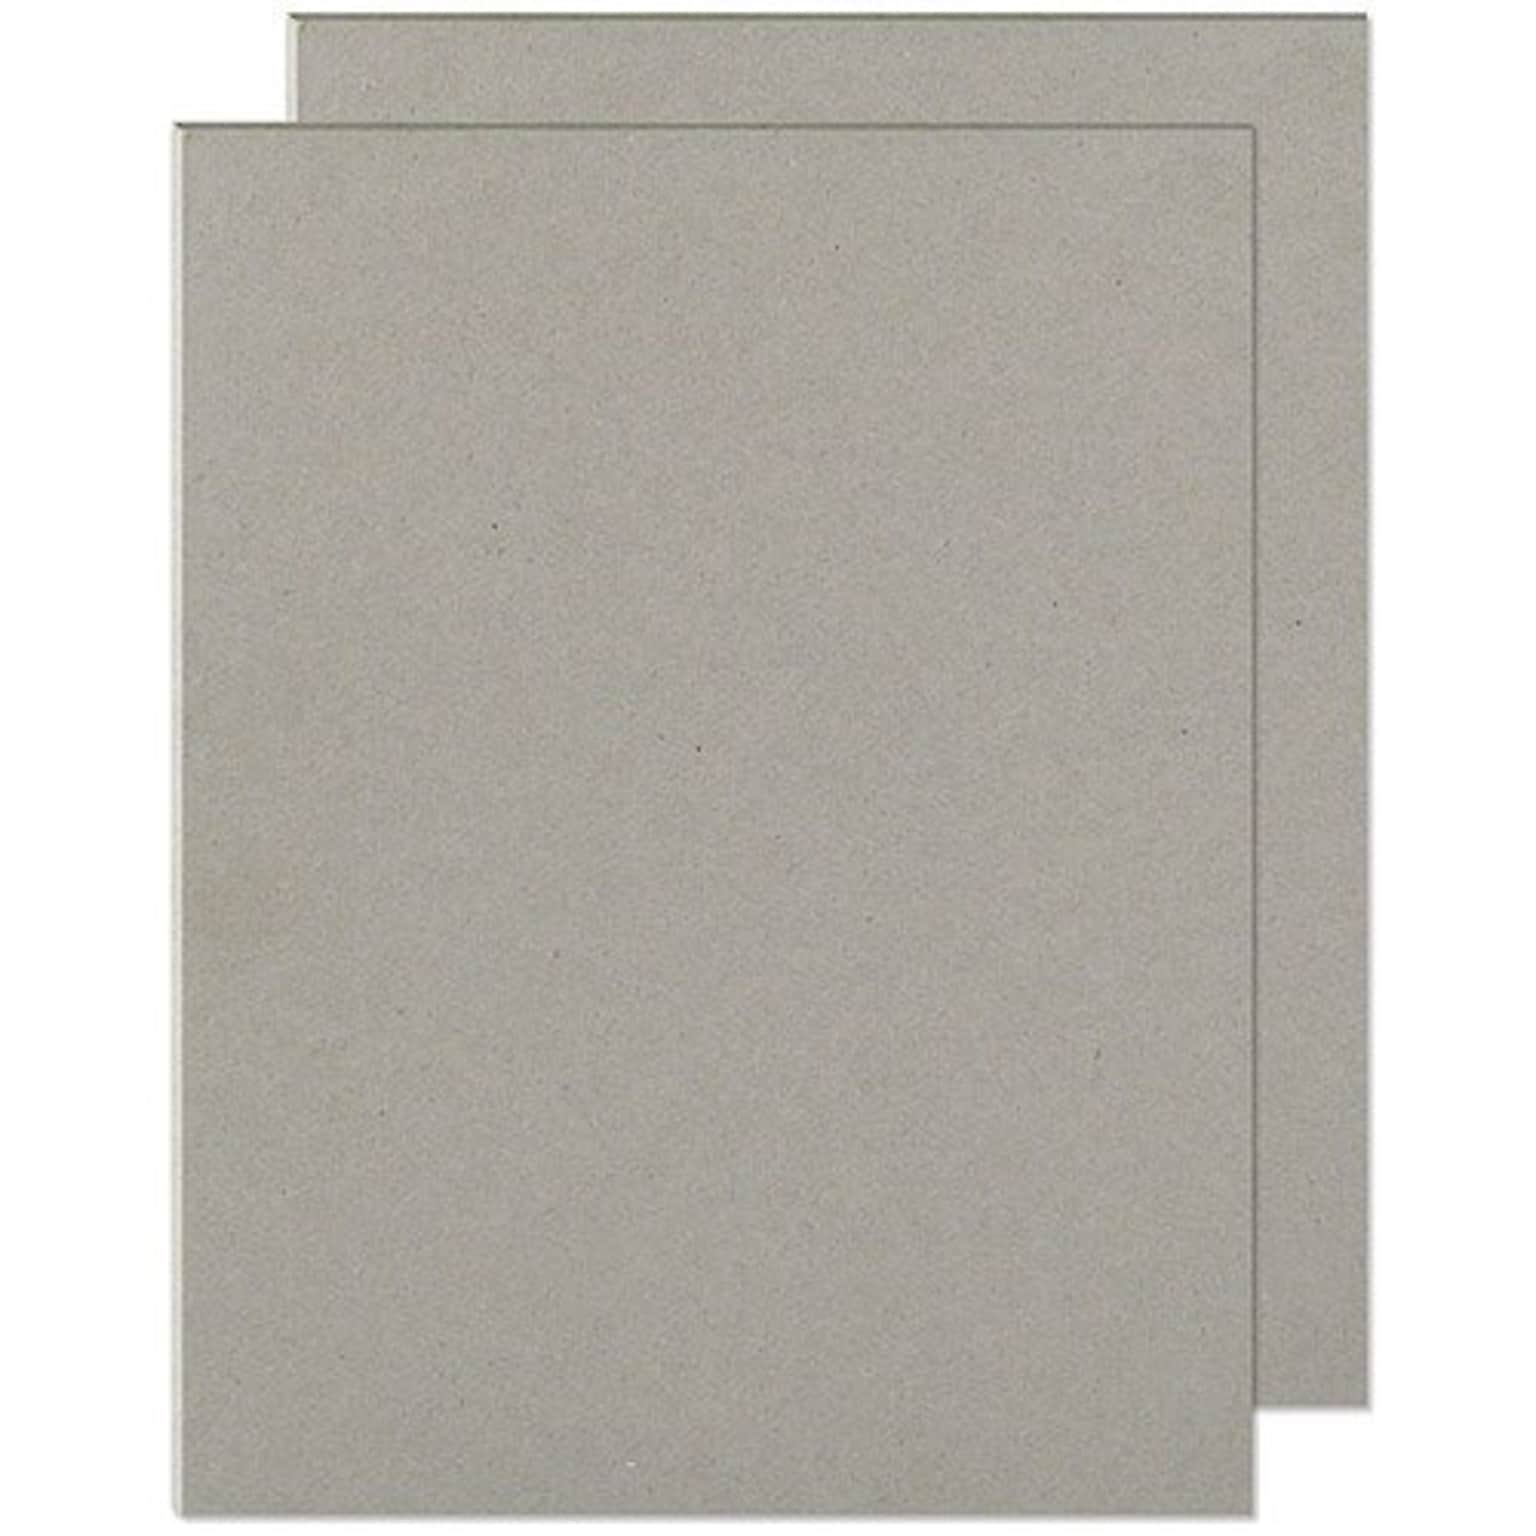 Alliance Paperboard 8.5x11 22PT Chipboard Gray (CP8511)